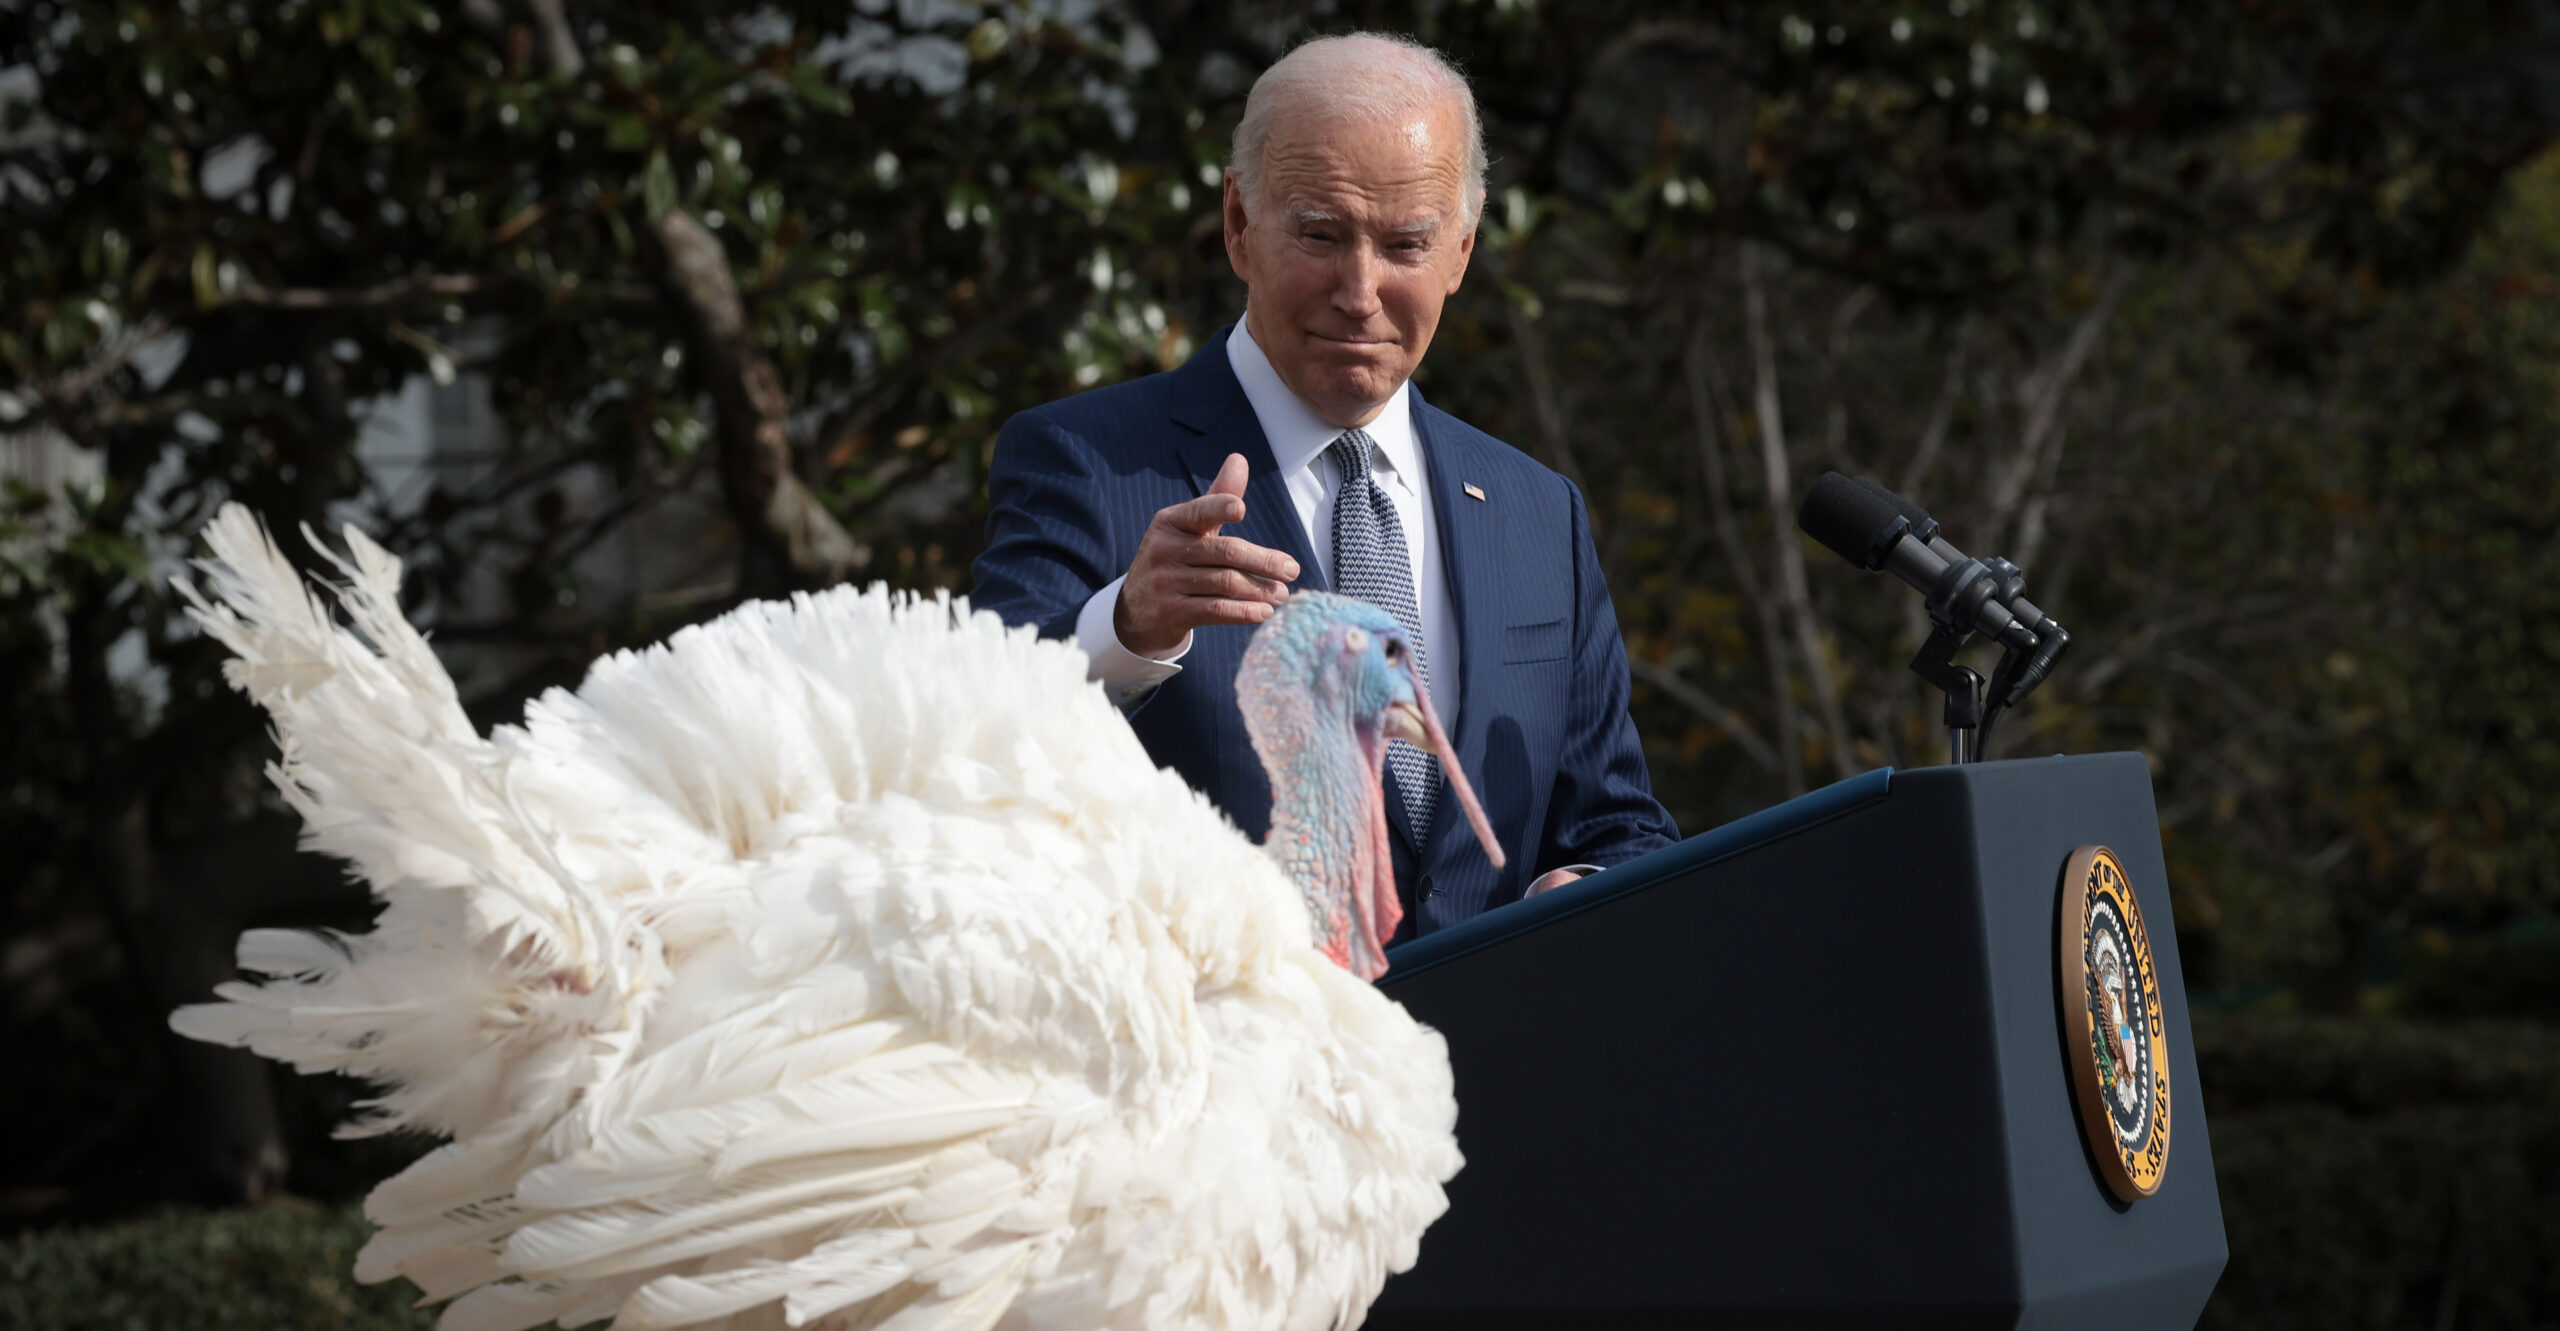 NO, THANKS: Bidenomics Is a Big Turkey, and Not Only at Thanksgiving